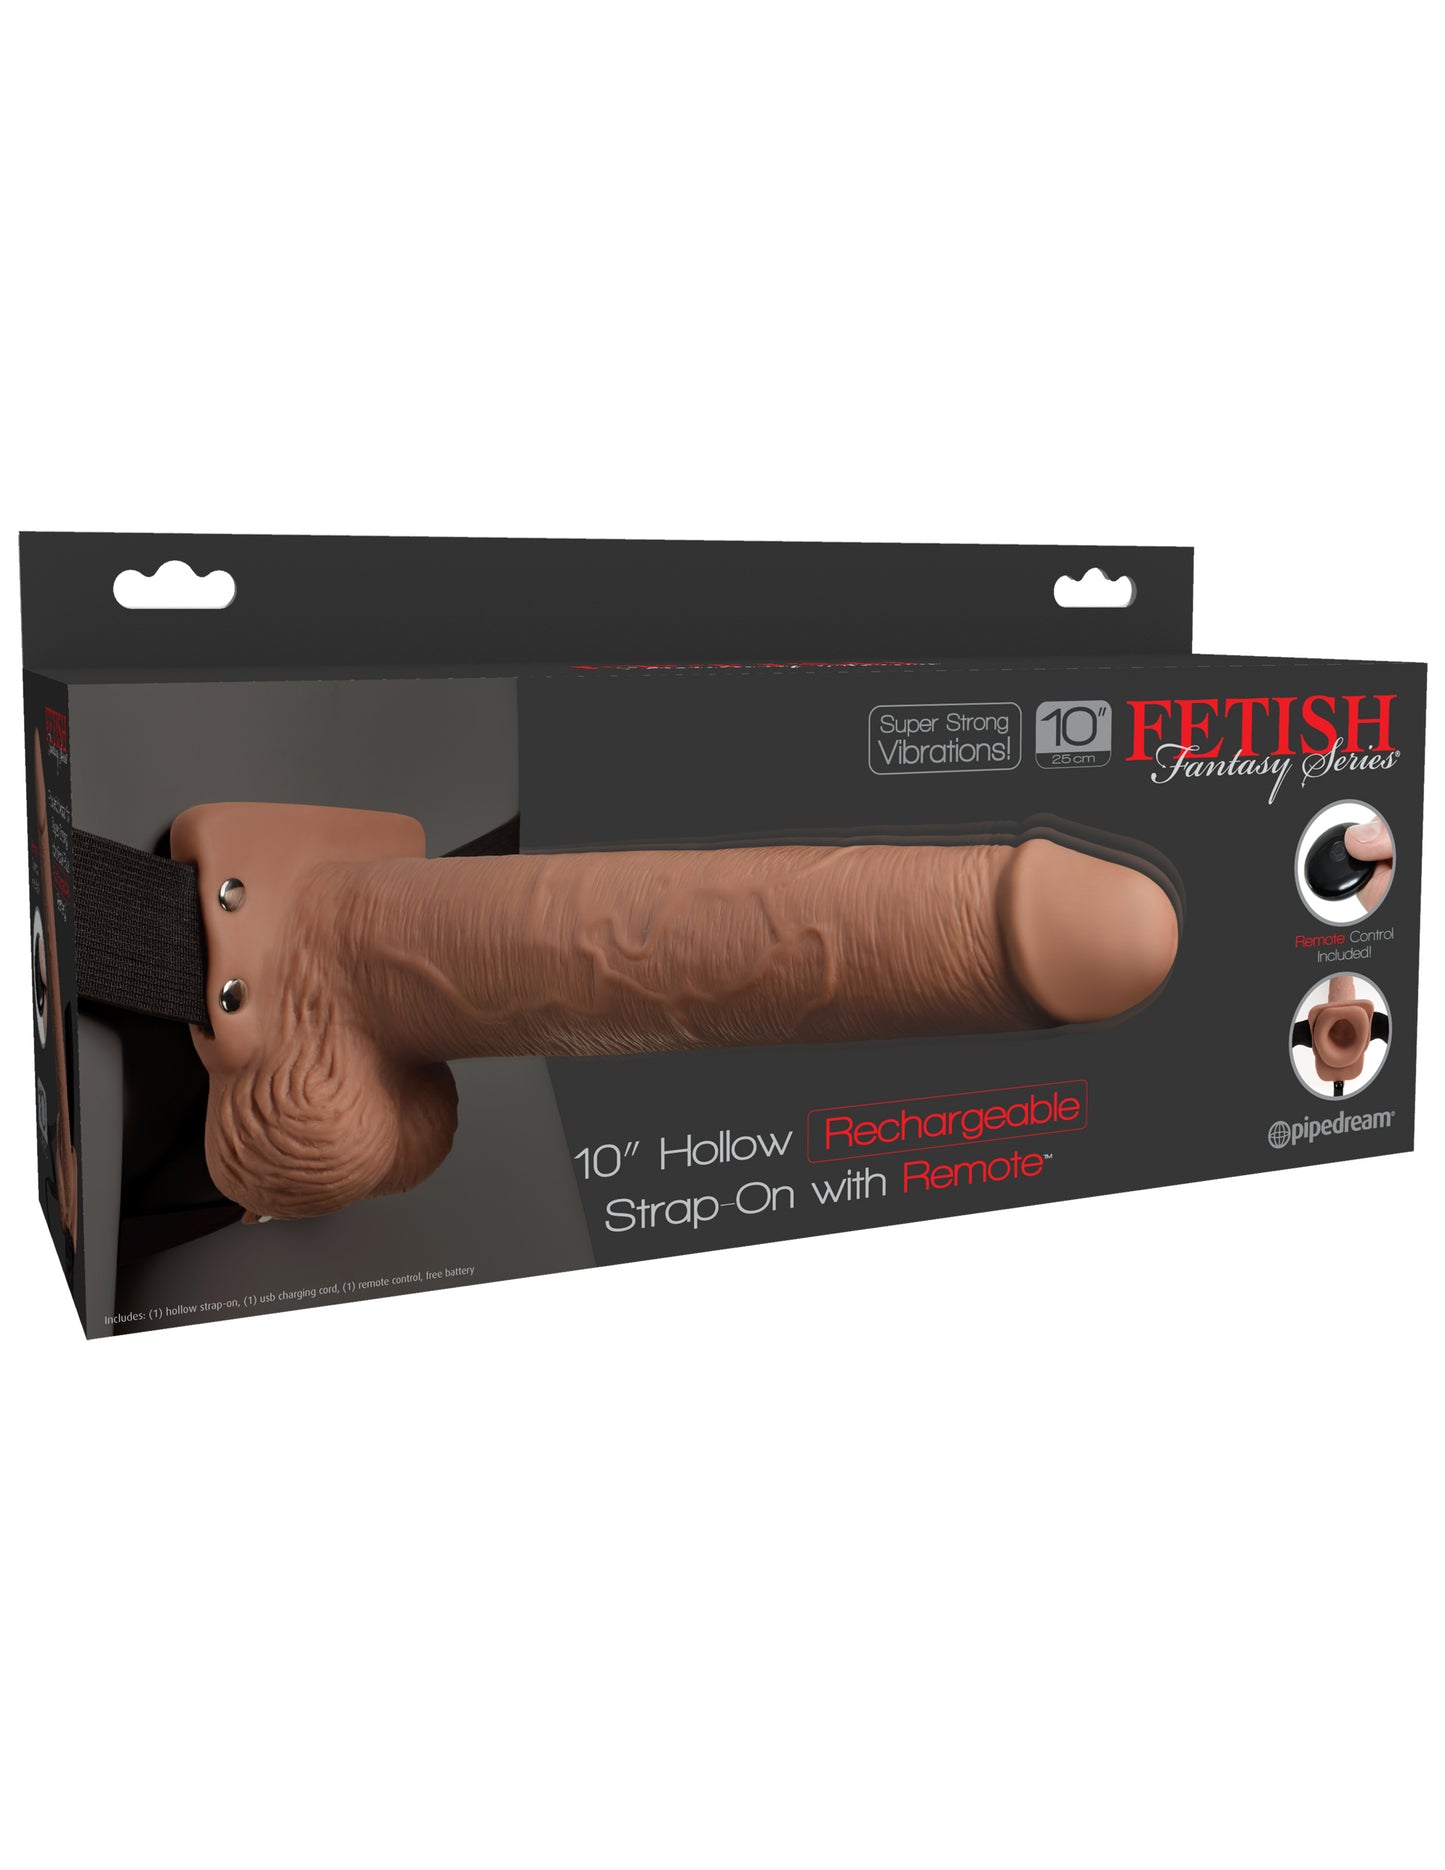 Fetish Fantasy Series 10" Hollow Rechargeable Strap-on With Remote - Tan PD3396-22